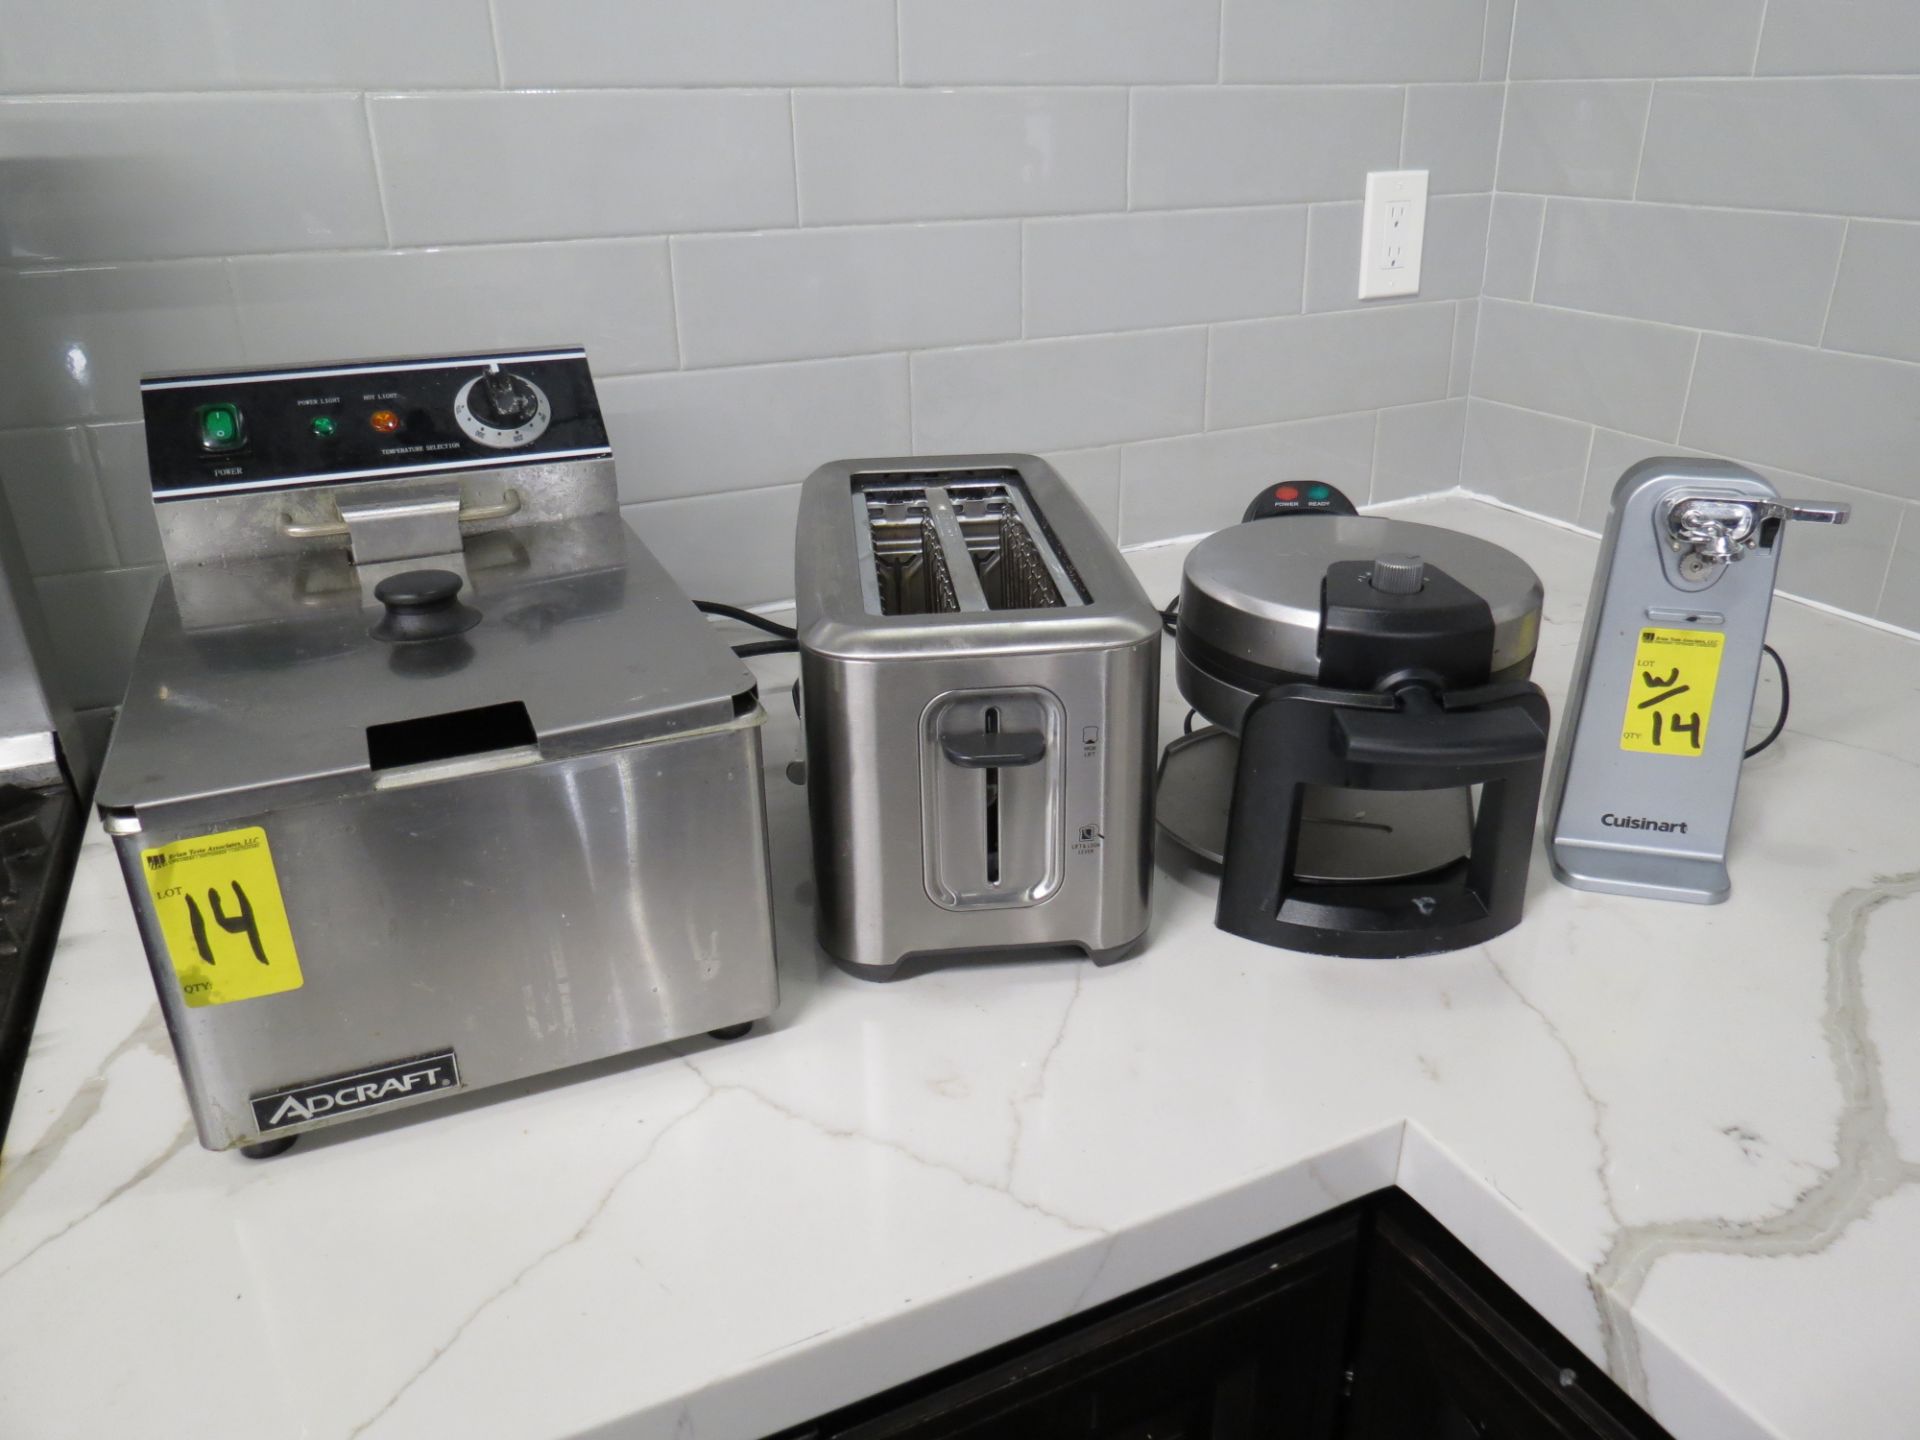 Lot ADCRAFT Deep Fryer, Stainless Steel Toaster, Cuisinart Waffle Maker & Electric Can Opener